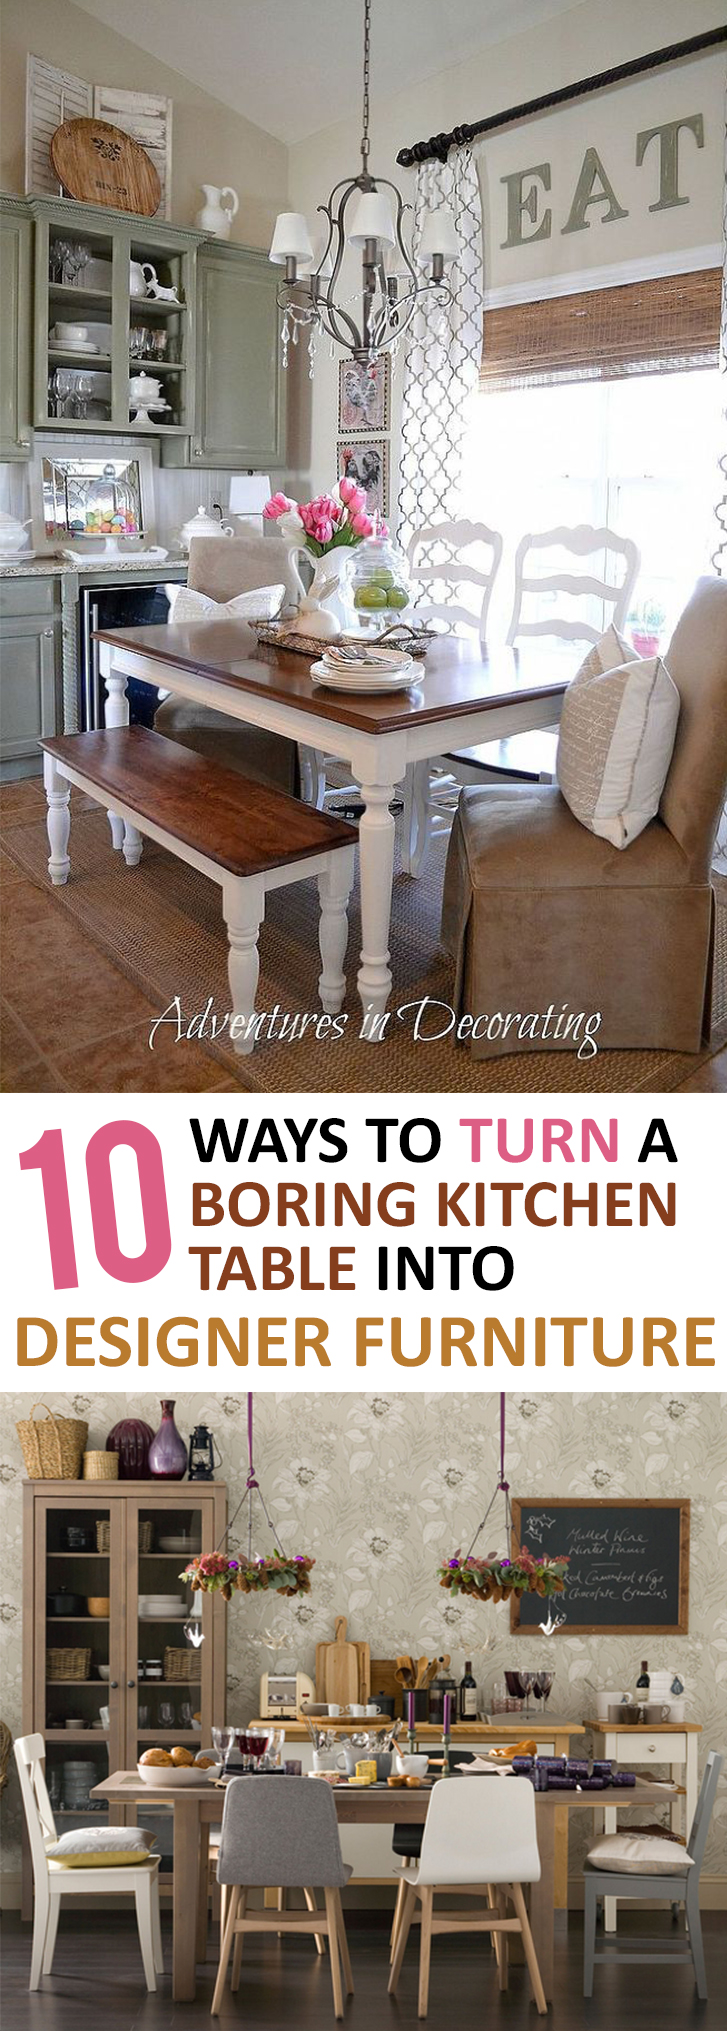 10 Ways to Turn a Boring Kitchen Table into Designer Furniture